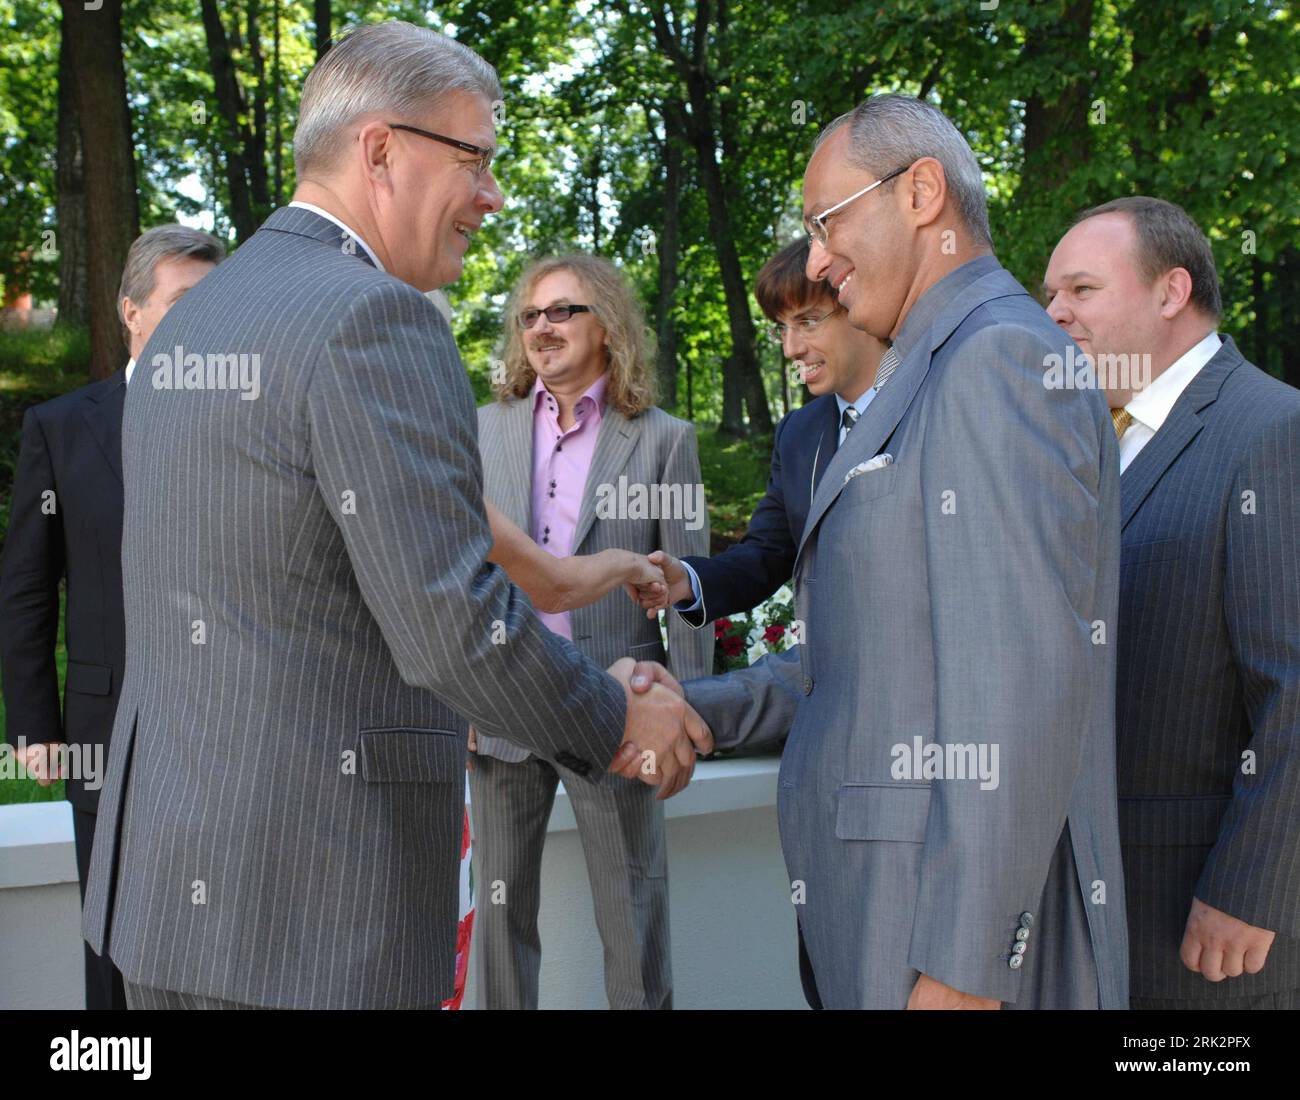 Bildnummer: 53232225  Datum: 30.07.2009  Copyright: imago/Xinhua (090730) -- JURMALA, July 30, 2009(Xinhua) -- The Latvian President Valdis Zatlers( L) meets with Alexander Shenkman ,Chairman of the organizing committee of the 8th New Wave International Contest of Young Singers of Popular Music, in Jurmala, July 30, 2009. The contest lasts from July 28 to August 2 in Jurmala, Latvia.     (Xinhua/Yang Dehong) (lmz) (1)LATVIA-PRESIDENT-INTERNATIONAL YOUNG SINGER MUSIC CONTEST  PUBLICATIONxNOTxINxCHN  People Politik kbdig xub  2009 quer Wirtschaft    Image number 53232225 Date 30 07 2009 Copyrigh Stock Photo